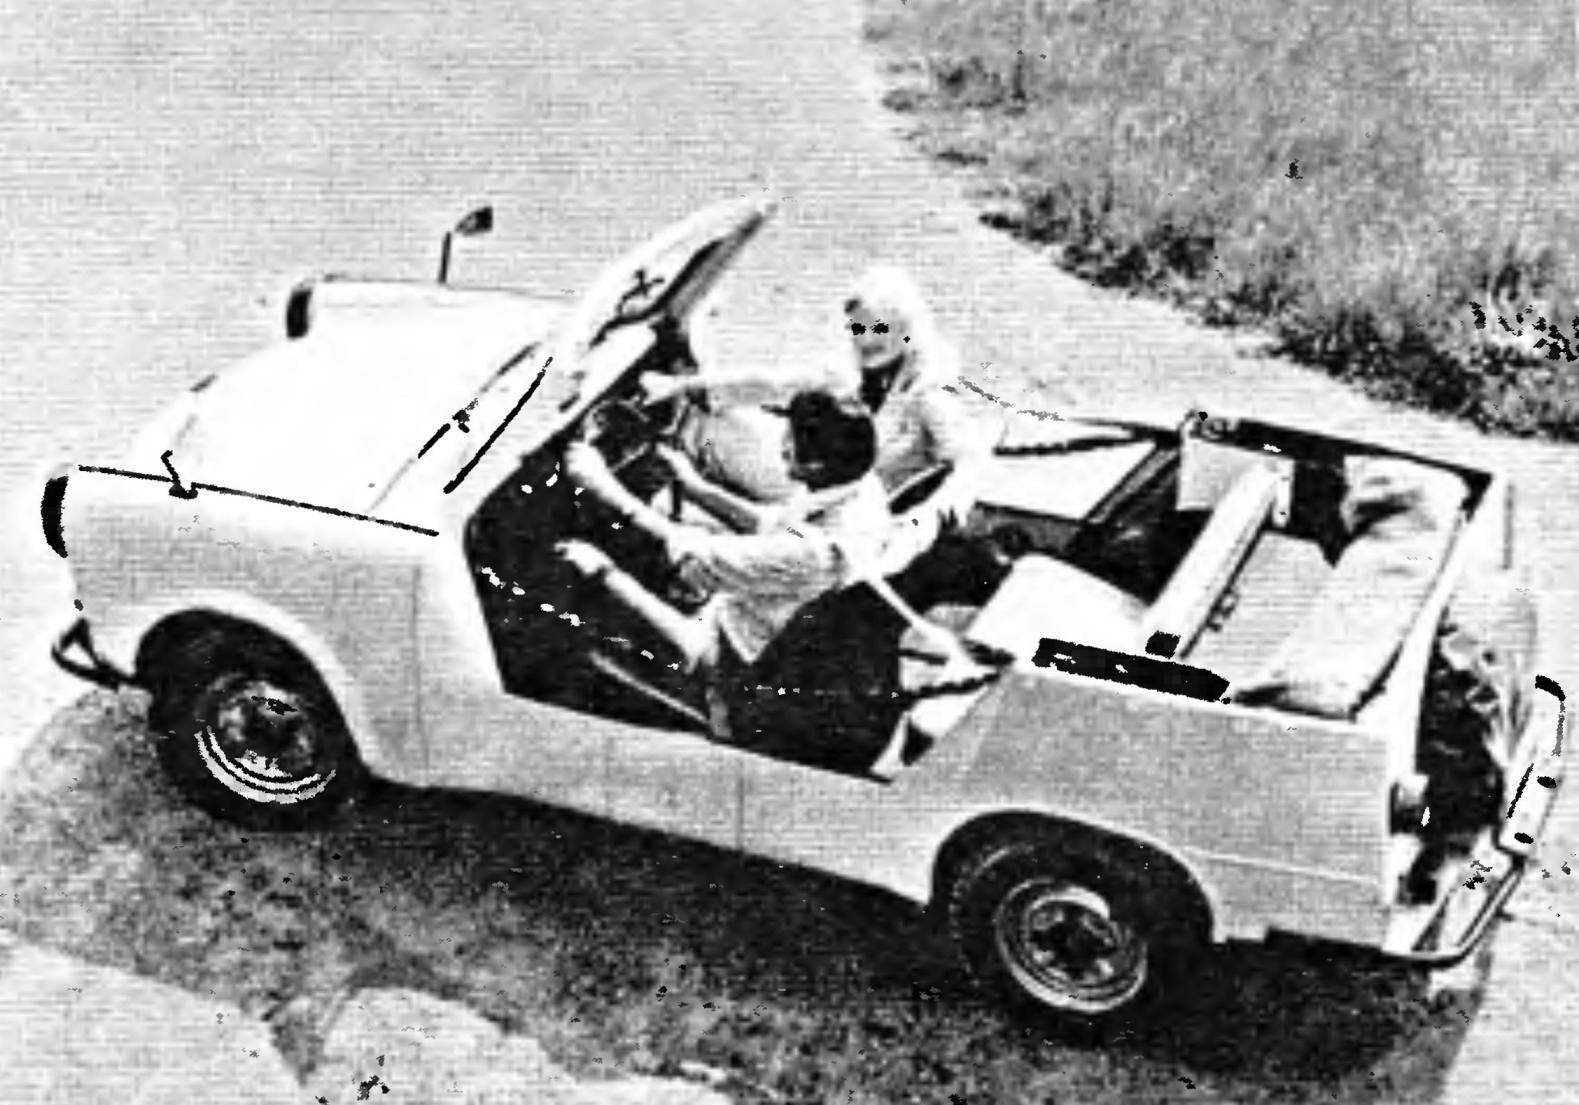 Trabant P601 Tramp—a car with a simplified open body